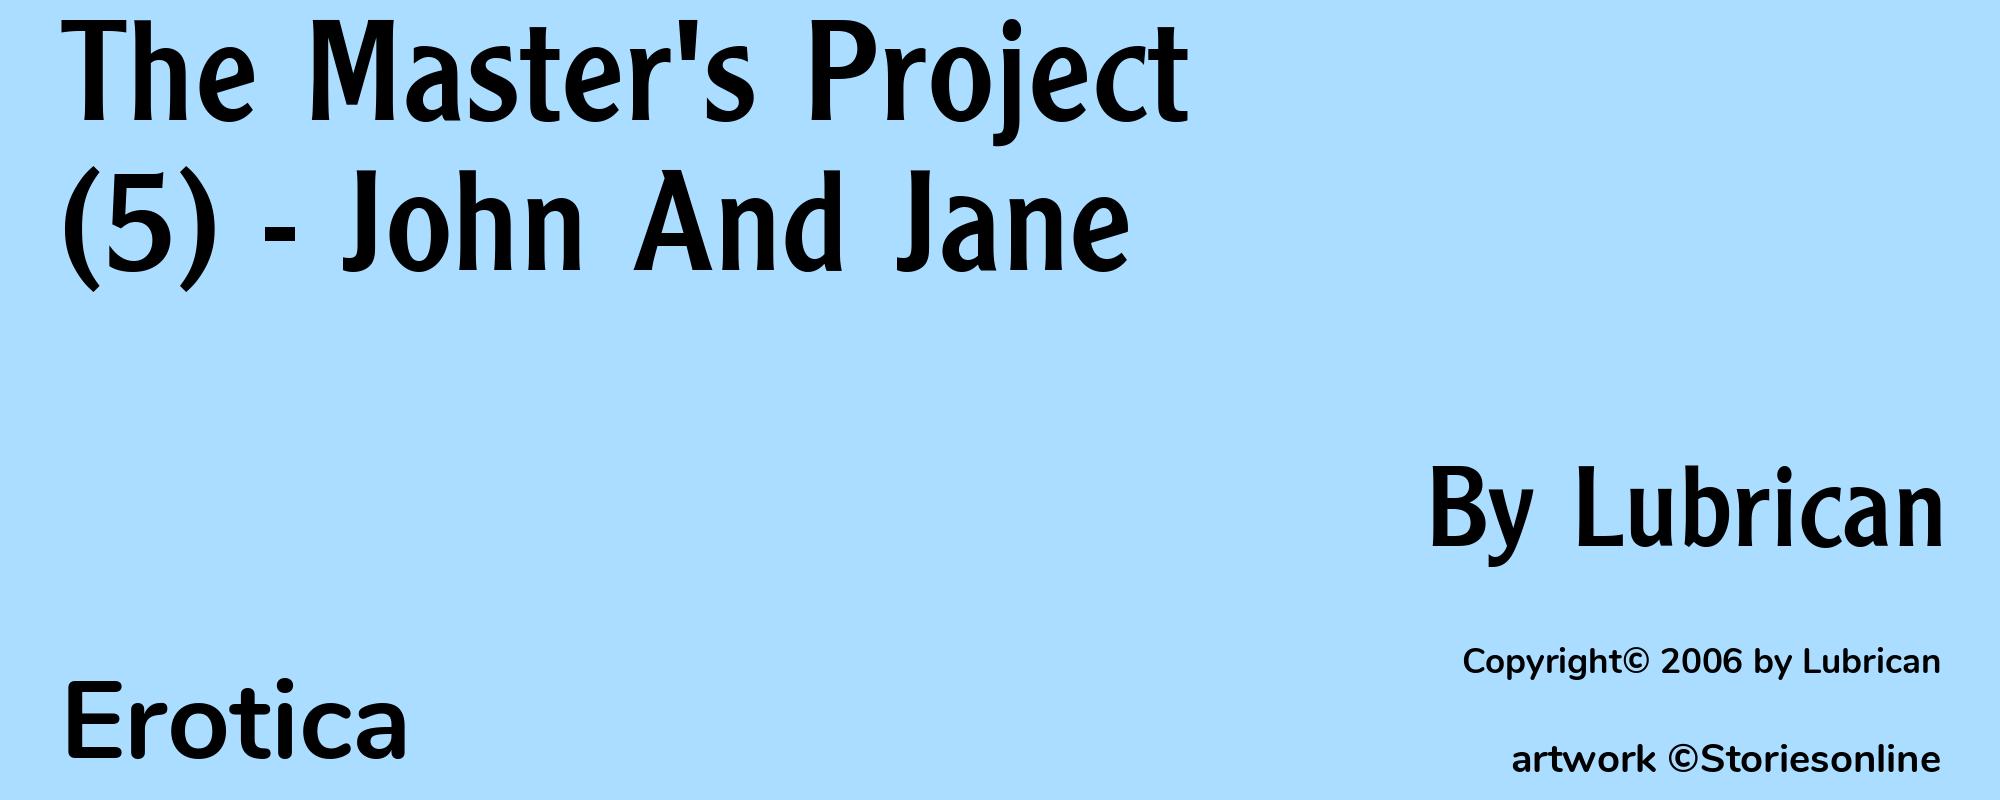 The Master's Project (5) - John And Jane - Cover